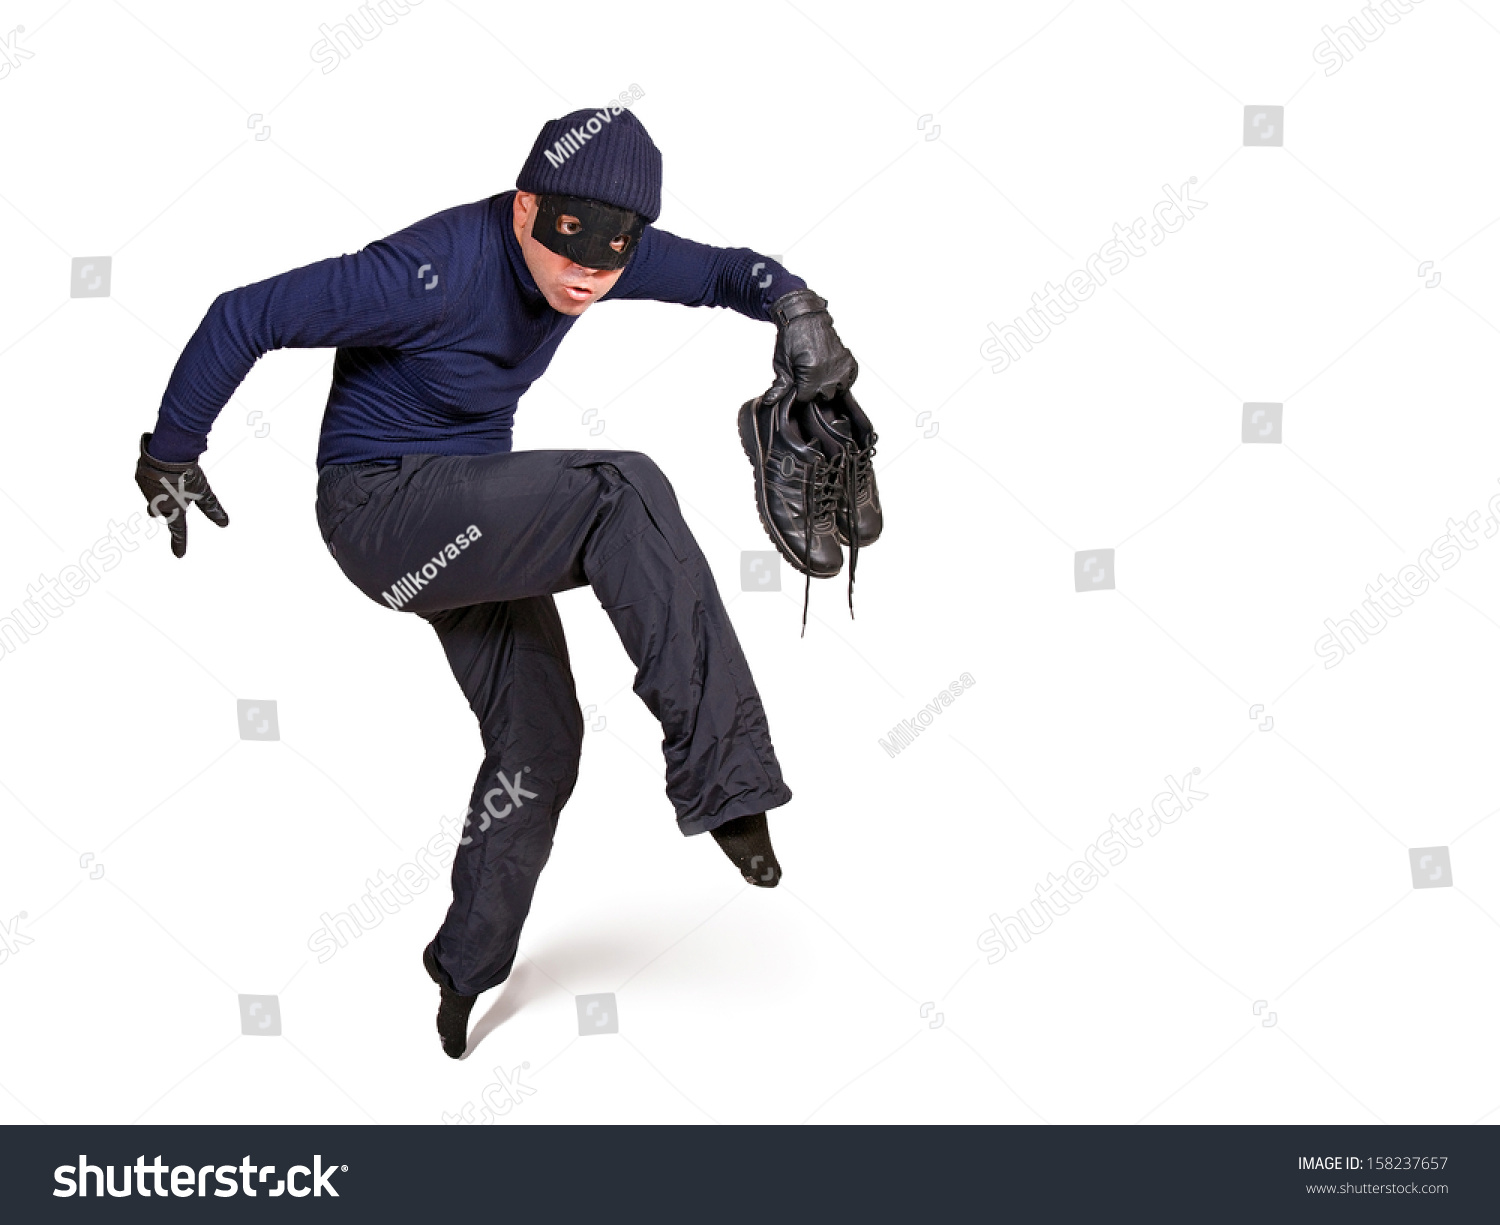 stock-photo-thief-walking-on-tiptoe-burglar-with-a-mask-on-his-face-walking-quietly-isolated-on-a-white-158237657.jpg